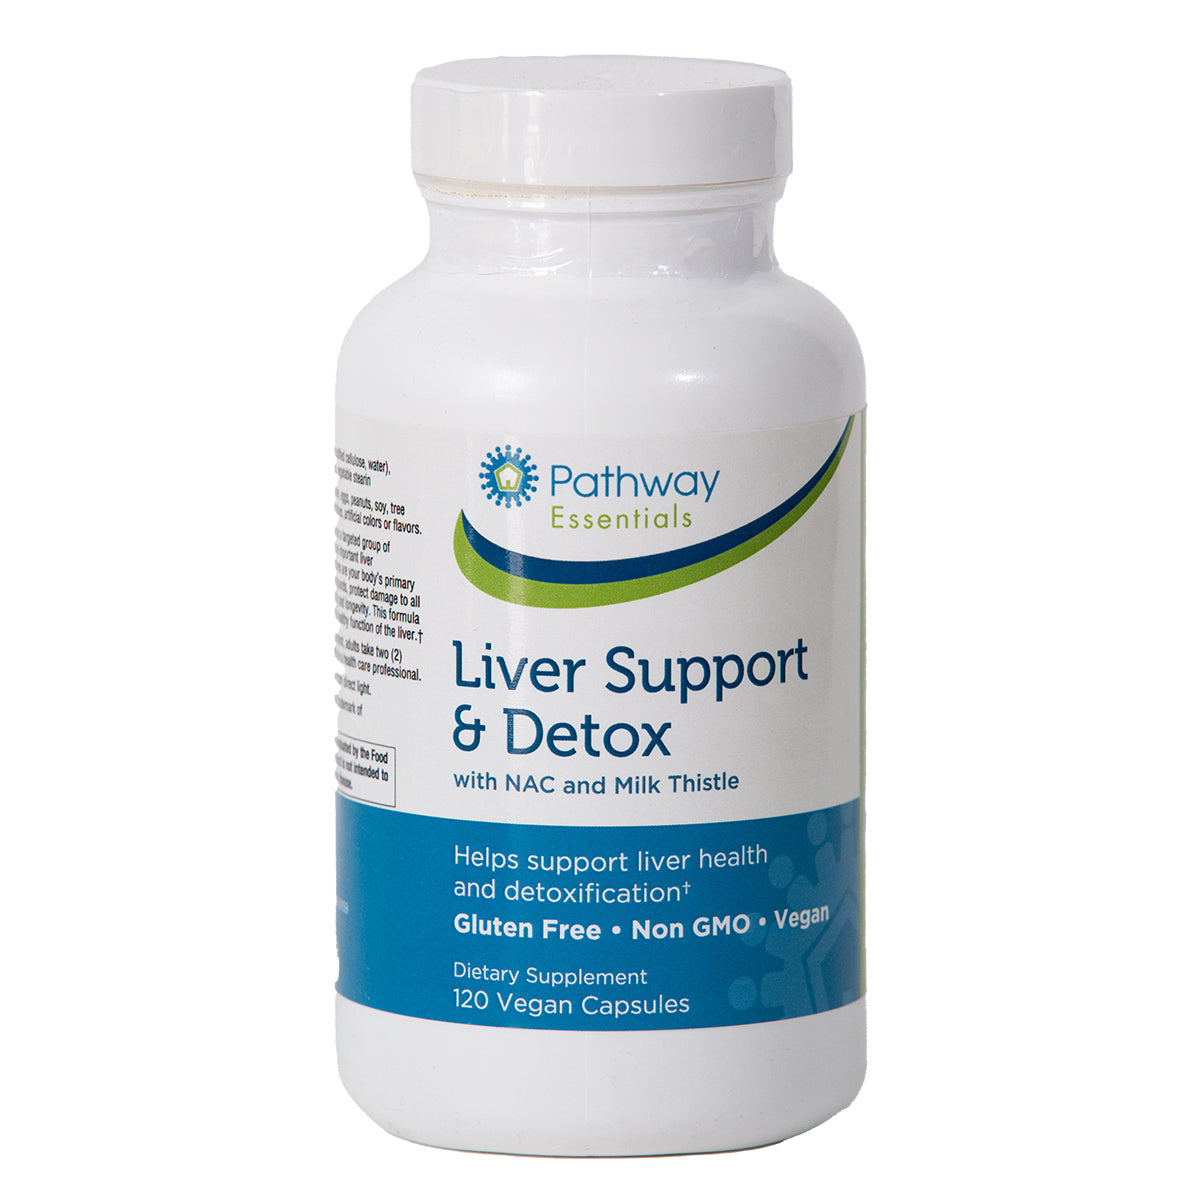 Liver Support And Detox